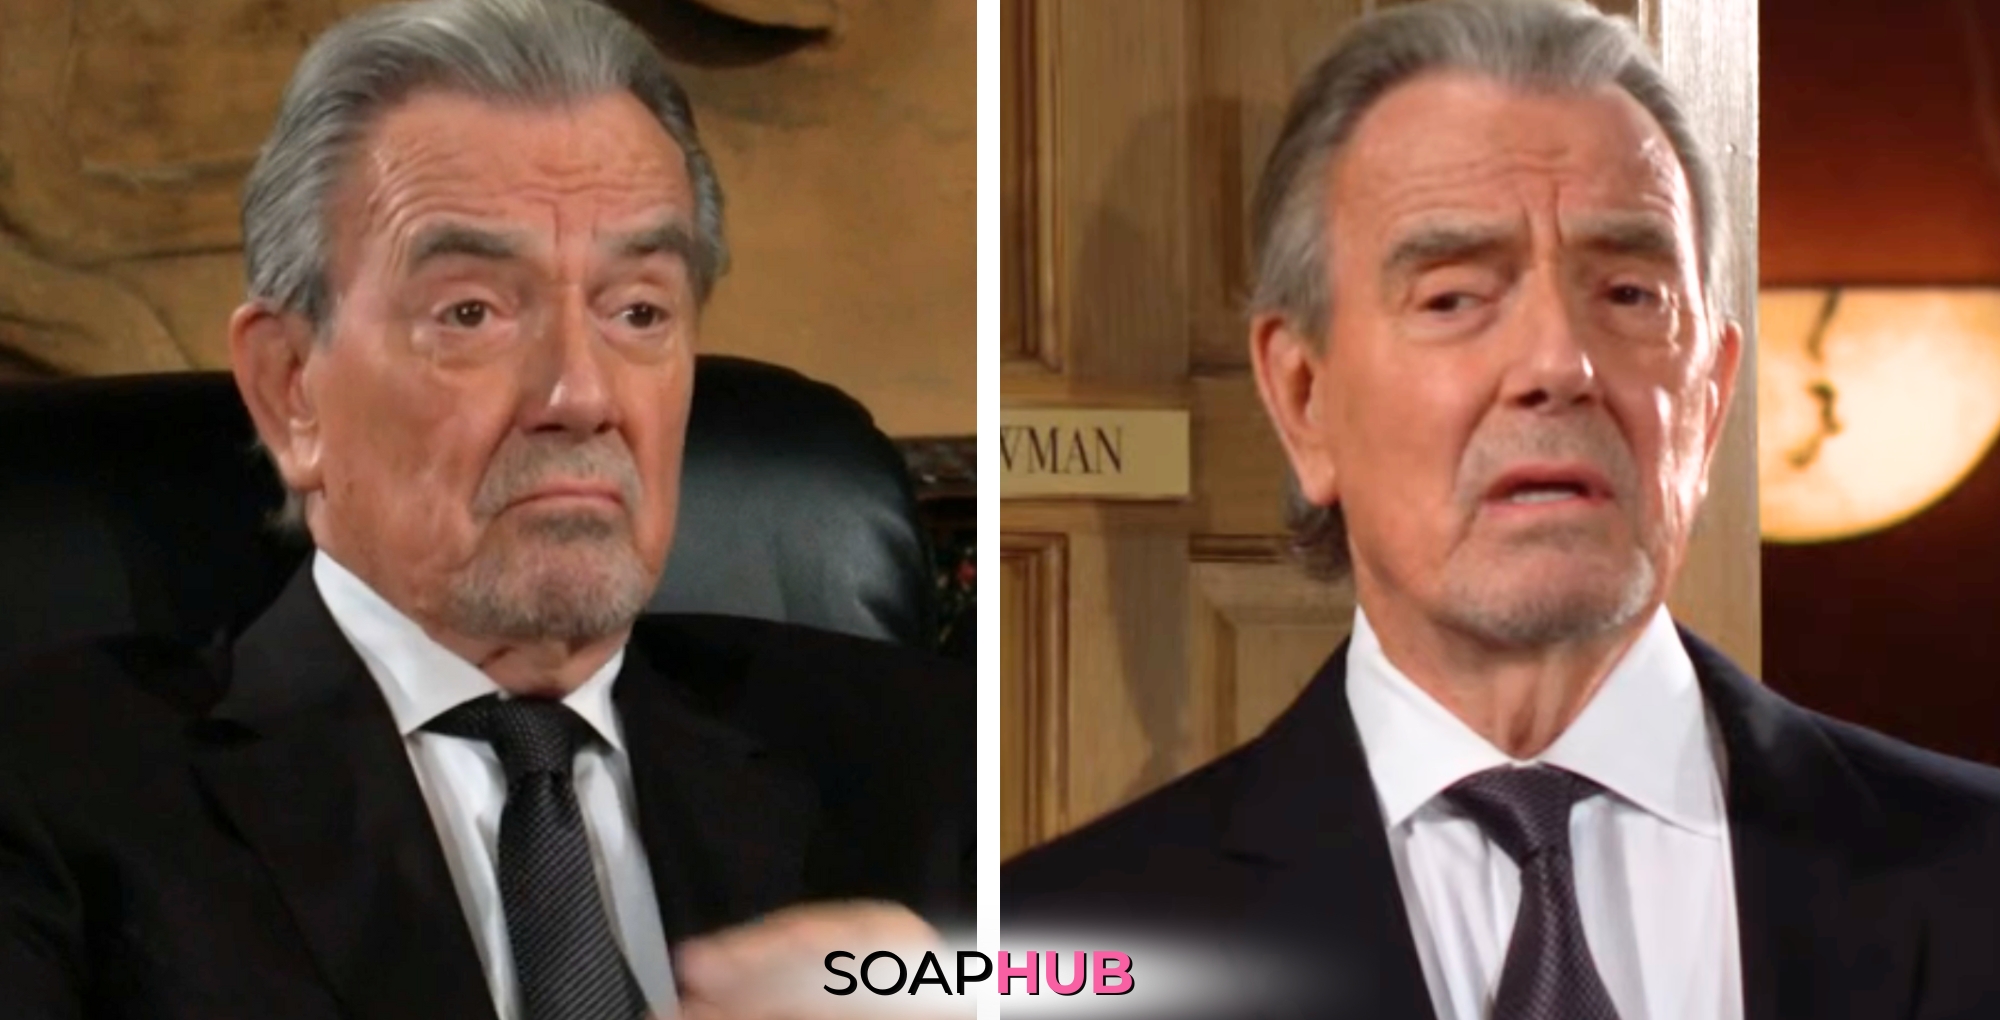 The Young and the Restless spoilers for Tuesday, March 19 feature Victor with the Soap Hub logo across the bottom.